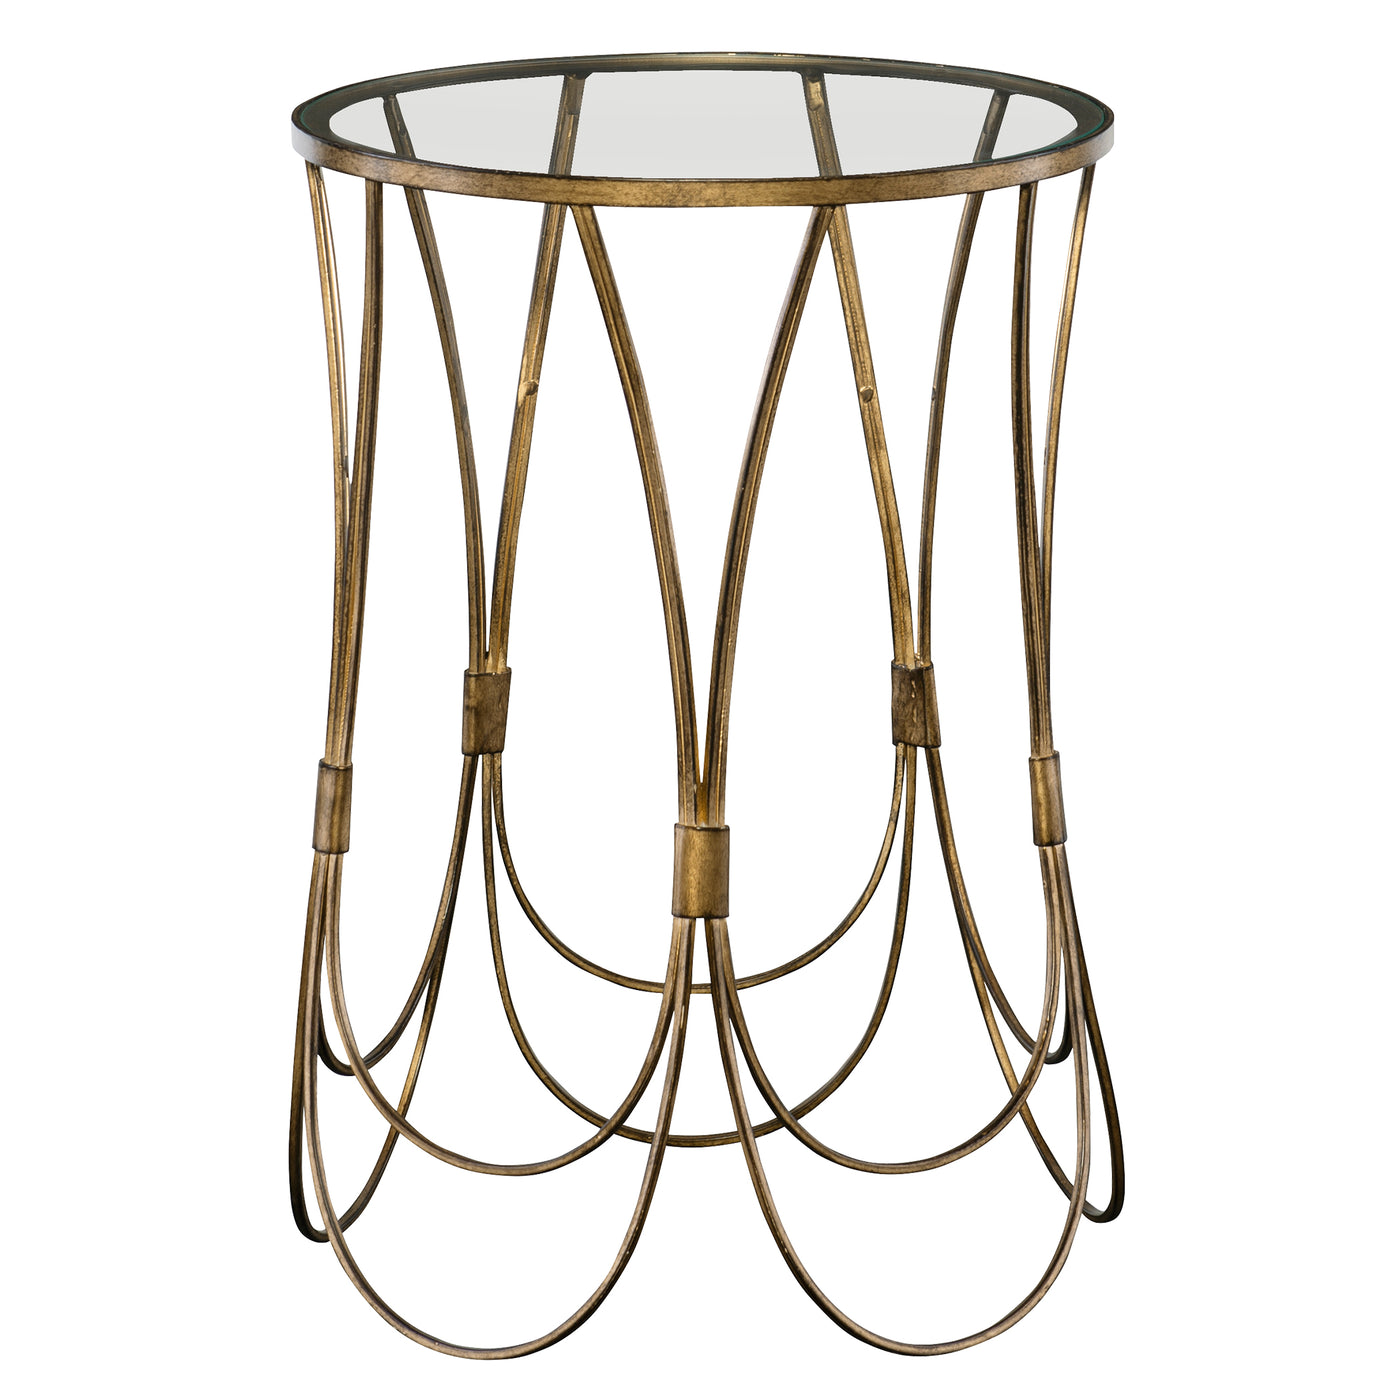 Solidly Constructed From Hand Forged Iron, This Accent Table Showcases Elegantly Curved Lines In An Antique Gold Finish Wi...